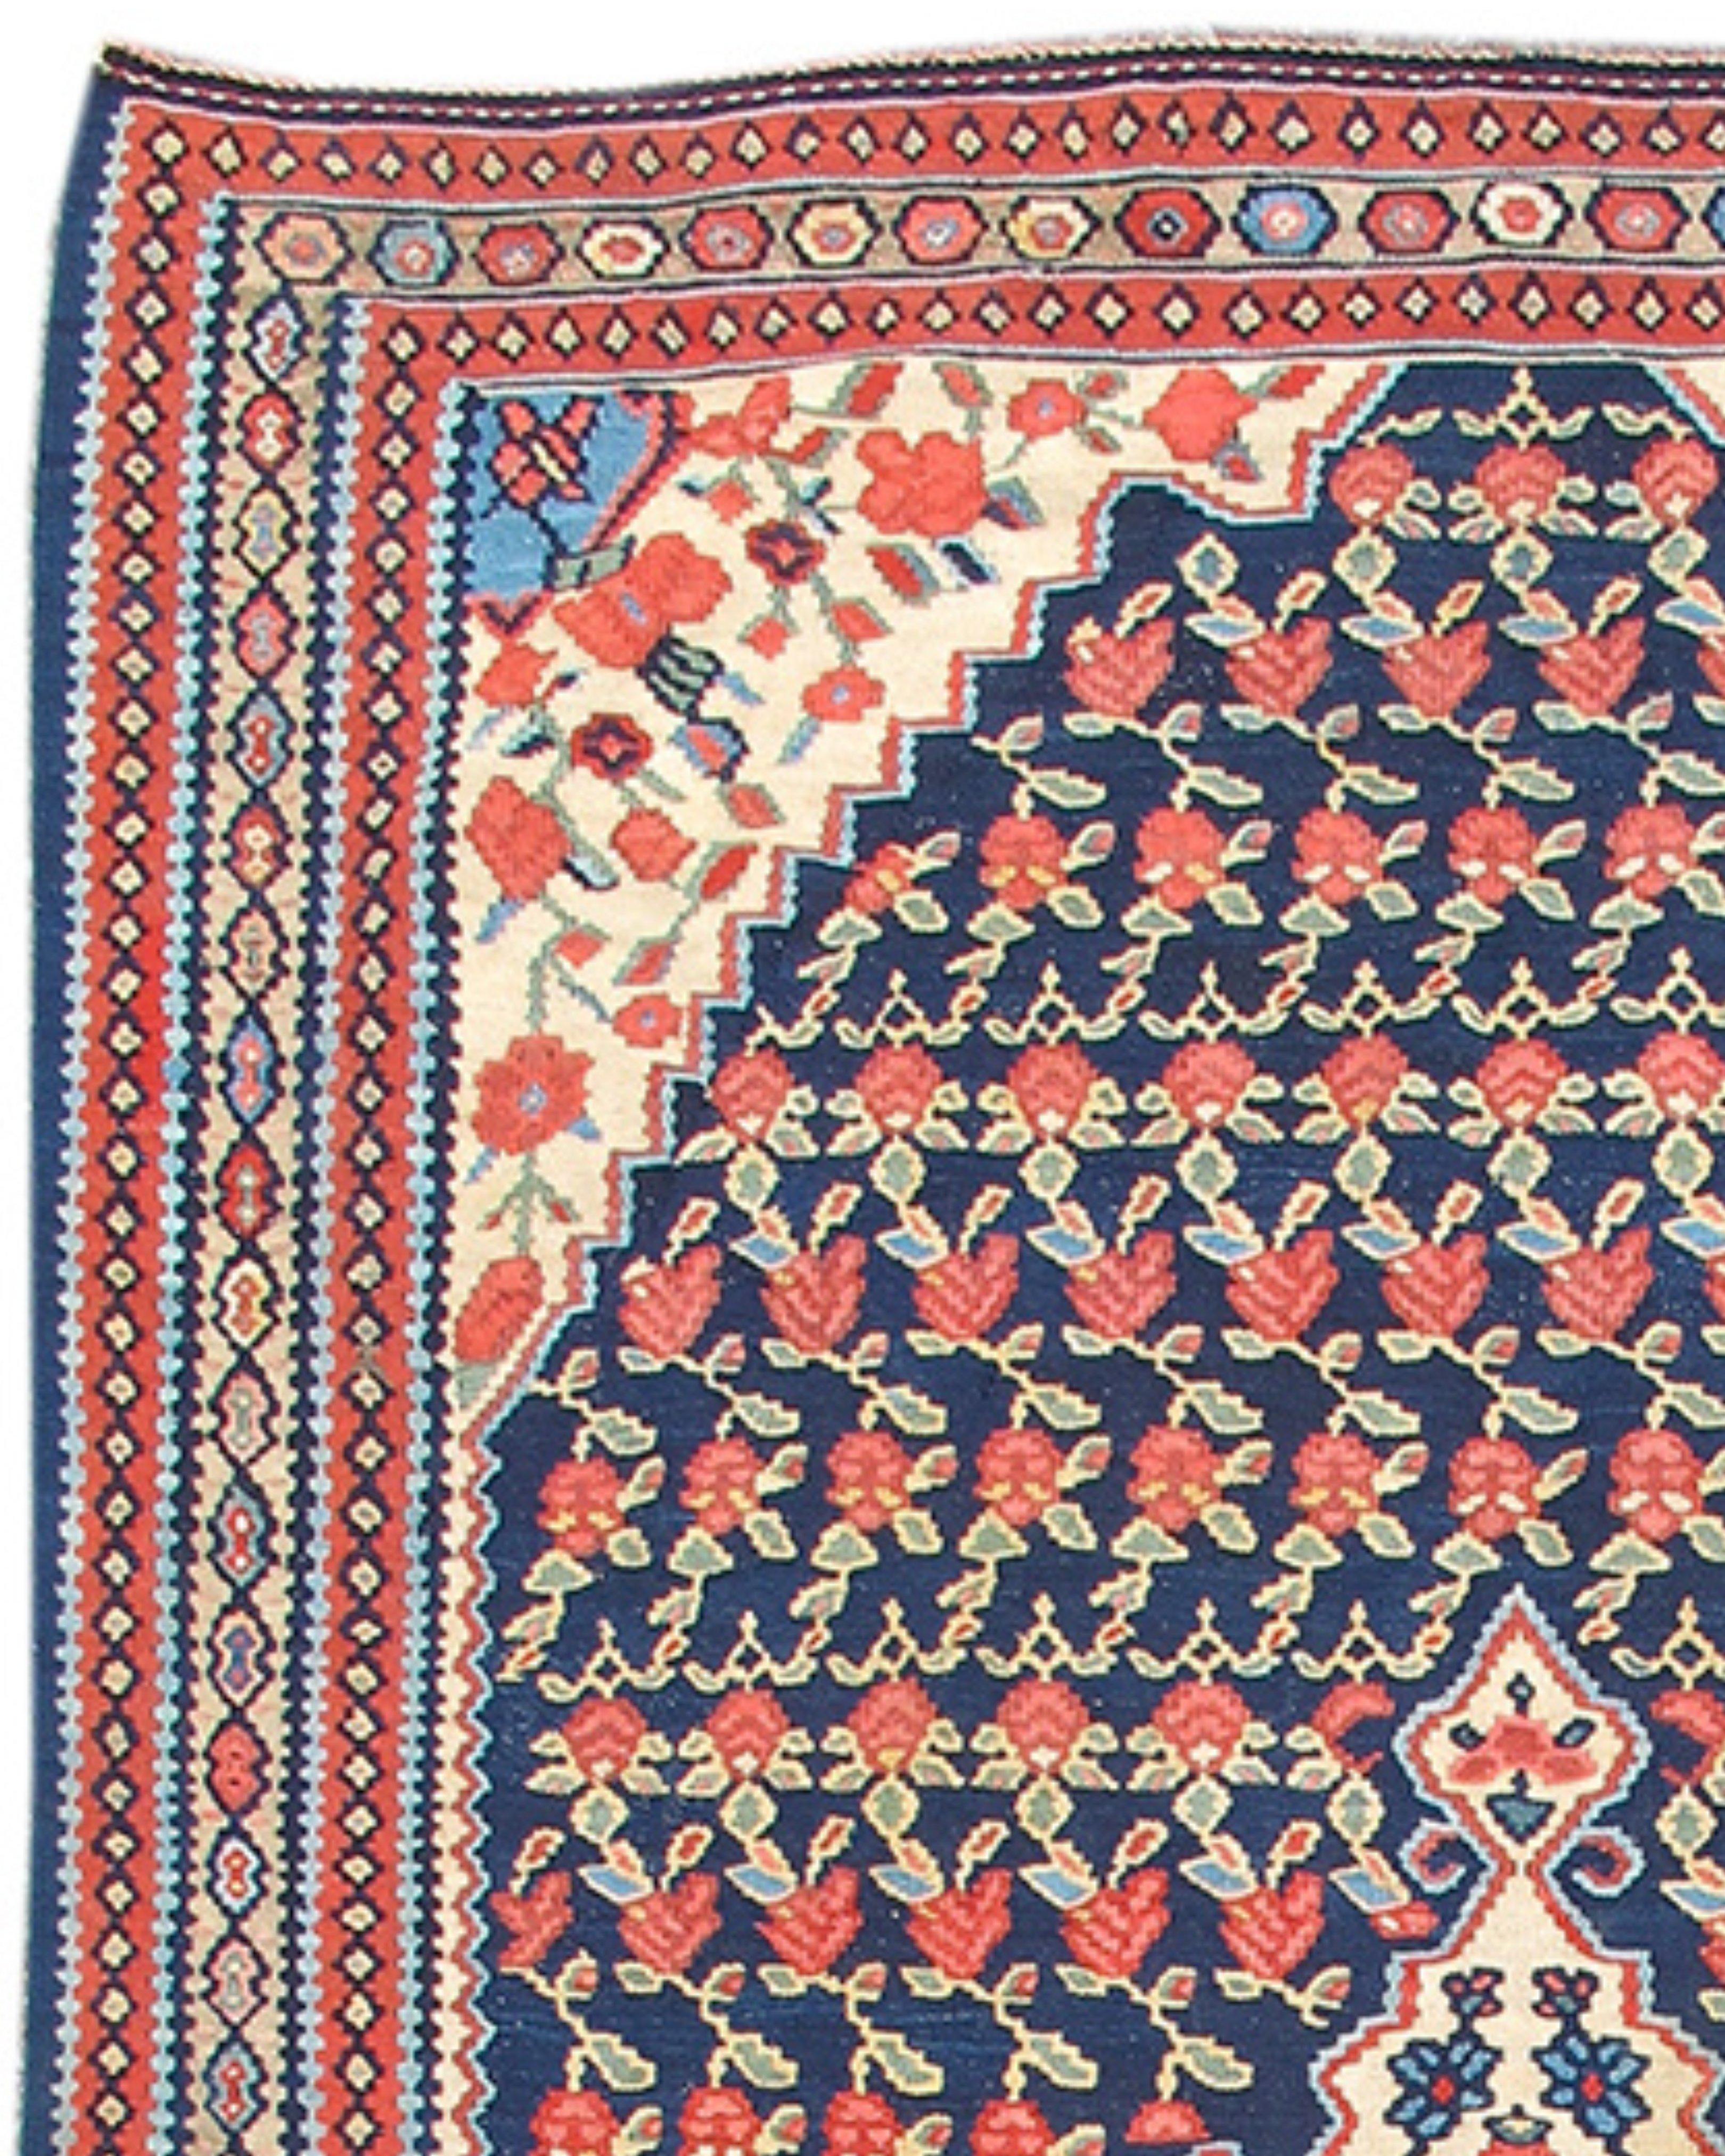 Bidjar Kilim Rug, Early 20th Century In Excellent Condition For Sale In San Francisco, CA